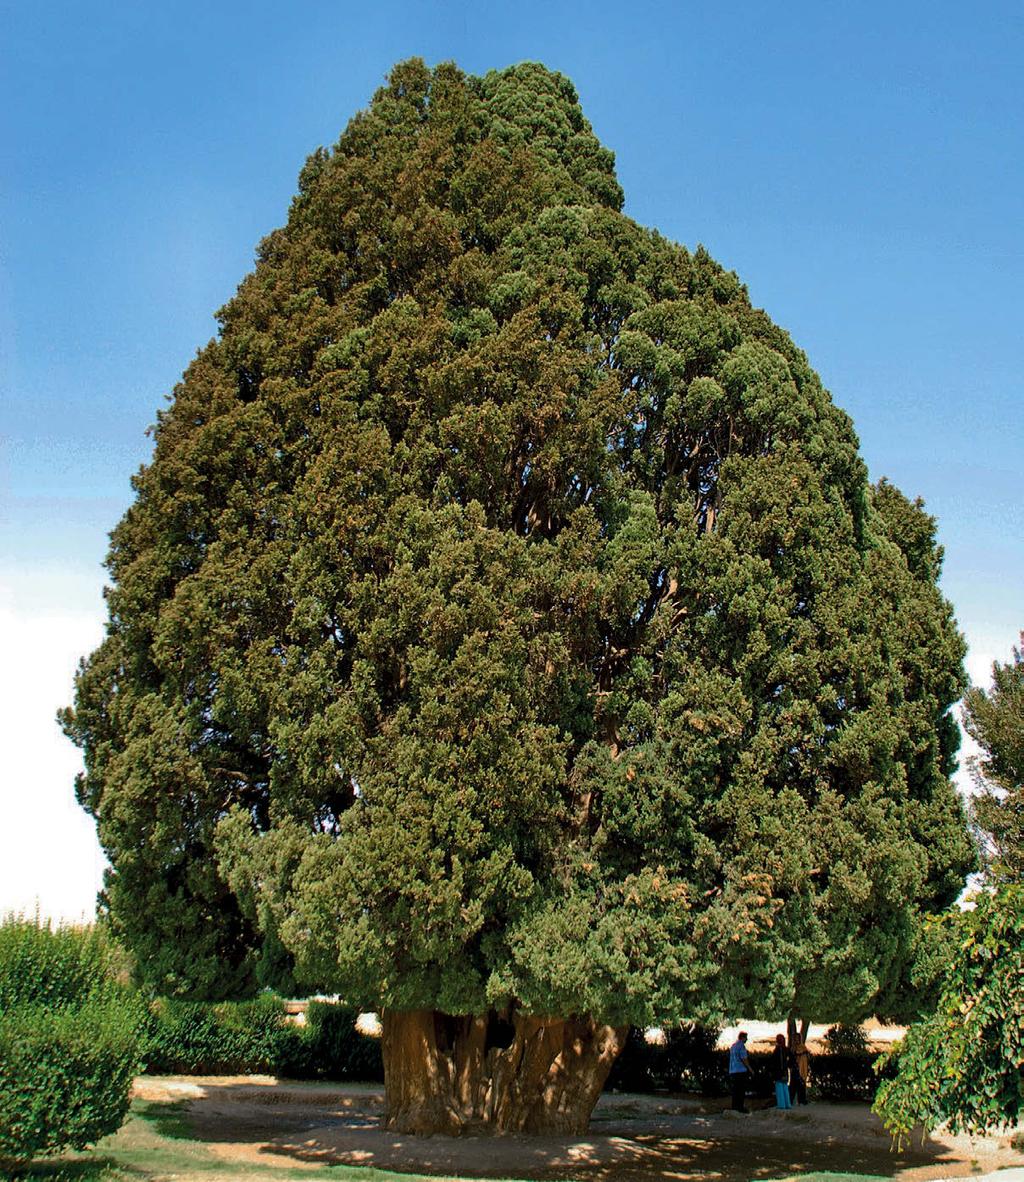 With a trunk circumference of over 14 metres and dating back more than 4,000 years, this wonderful cypress has marked the meeting point for caravans between East and West for centuries.